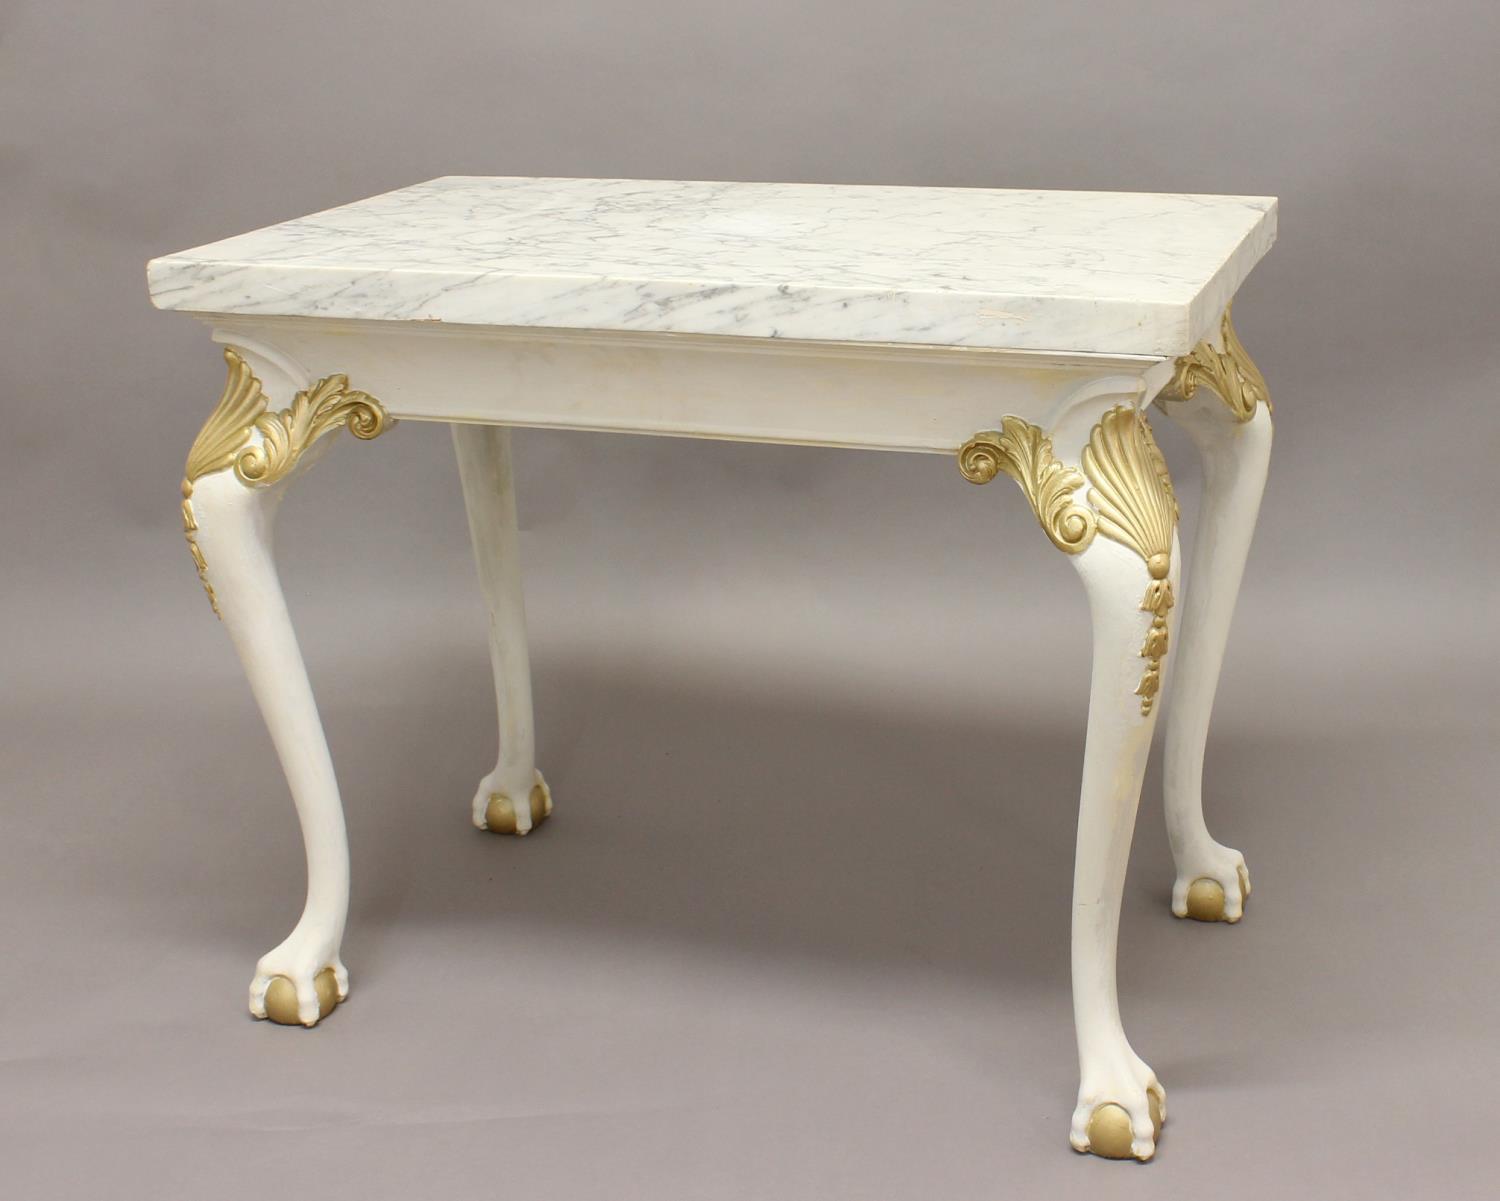 A MARBLE TOPPED CONSOLE TABLE, 20th century, the painted base with gilt detailing on ball and claw